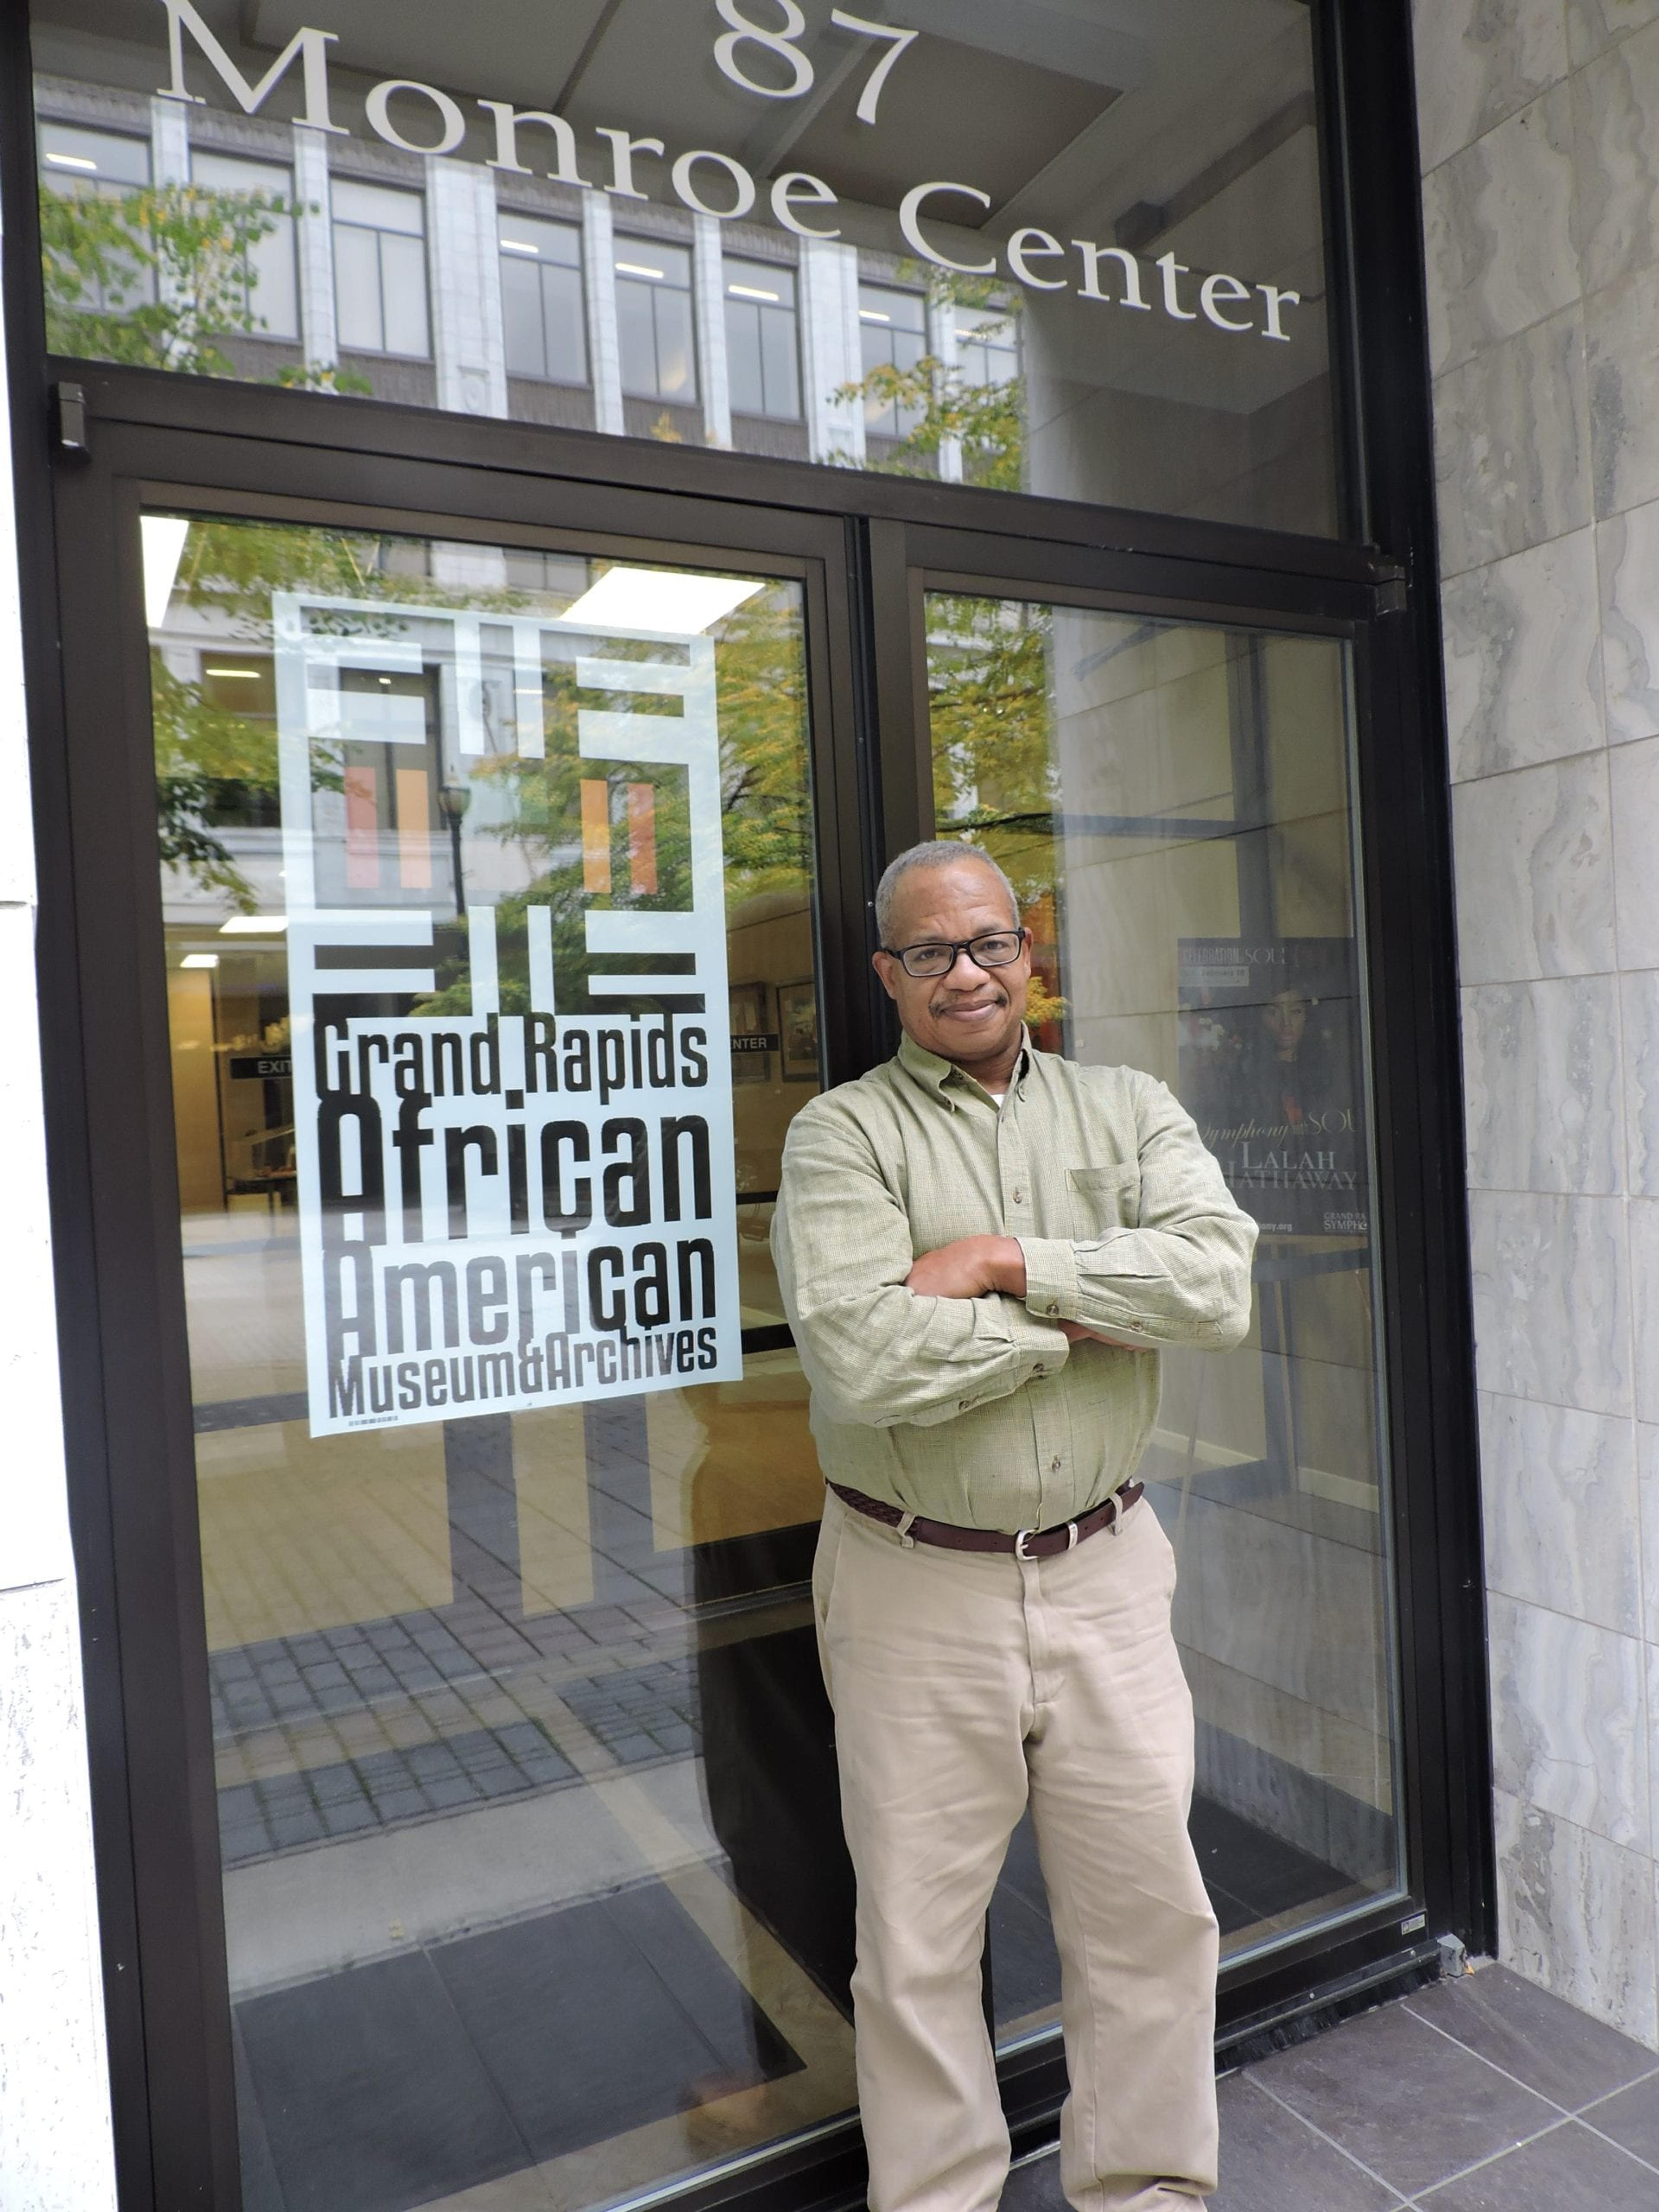 George Bayard III in front of the newly opened Grand Rapids African American Museum and Archives at 87 Monroe Center St. NW in downtown Grand Rapids. 